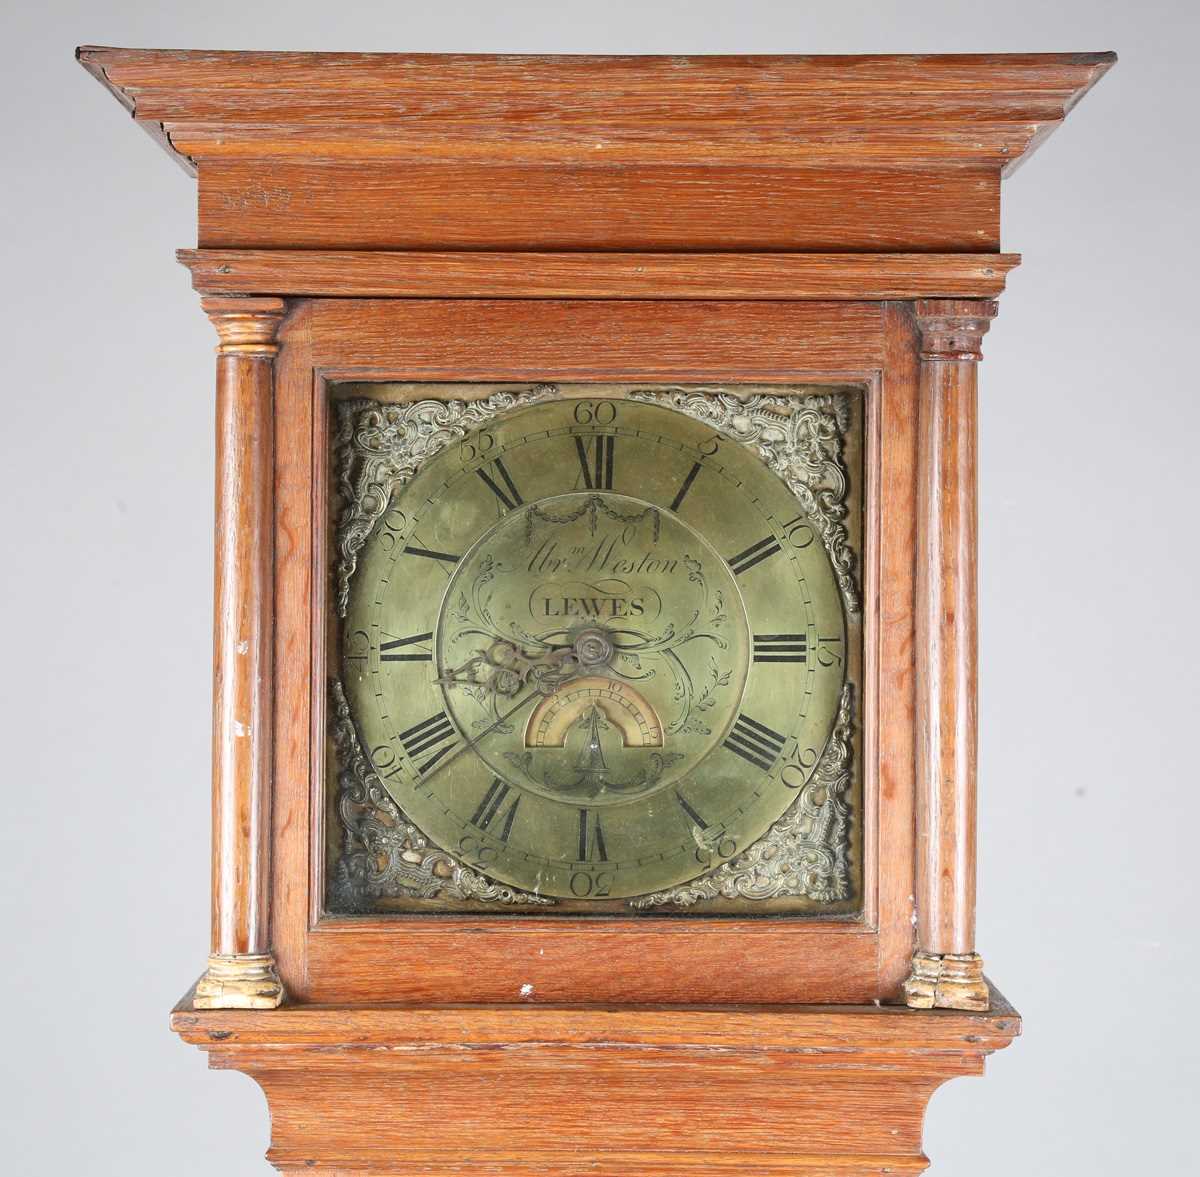 A mid-18th century oak longcase clock, the thirty hour movement striking on a bell via an outside